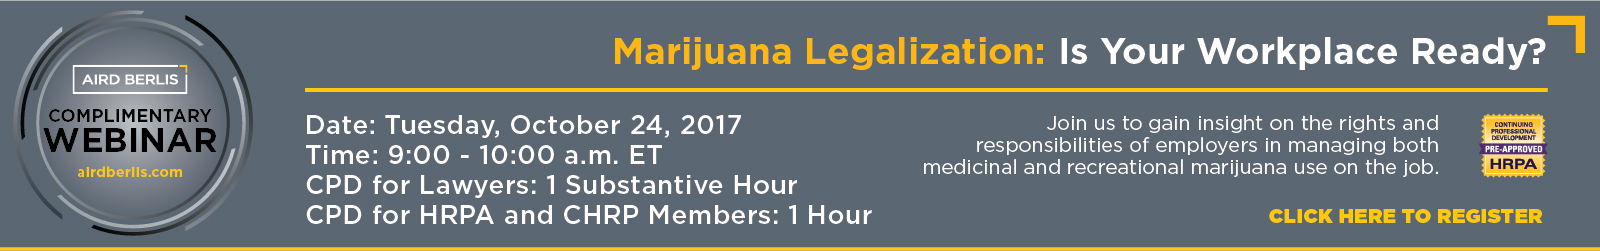 Marijuana Legalization Is Your Workplace Ready Growing Your Cannabusiness